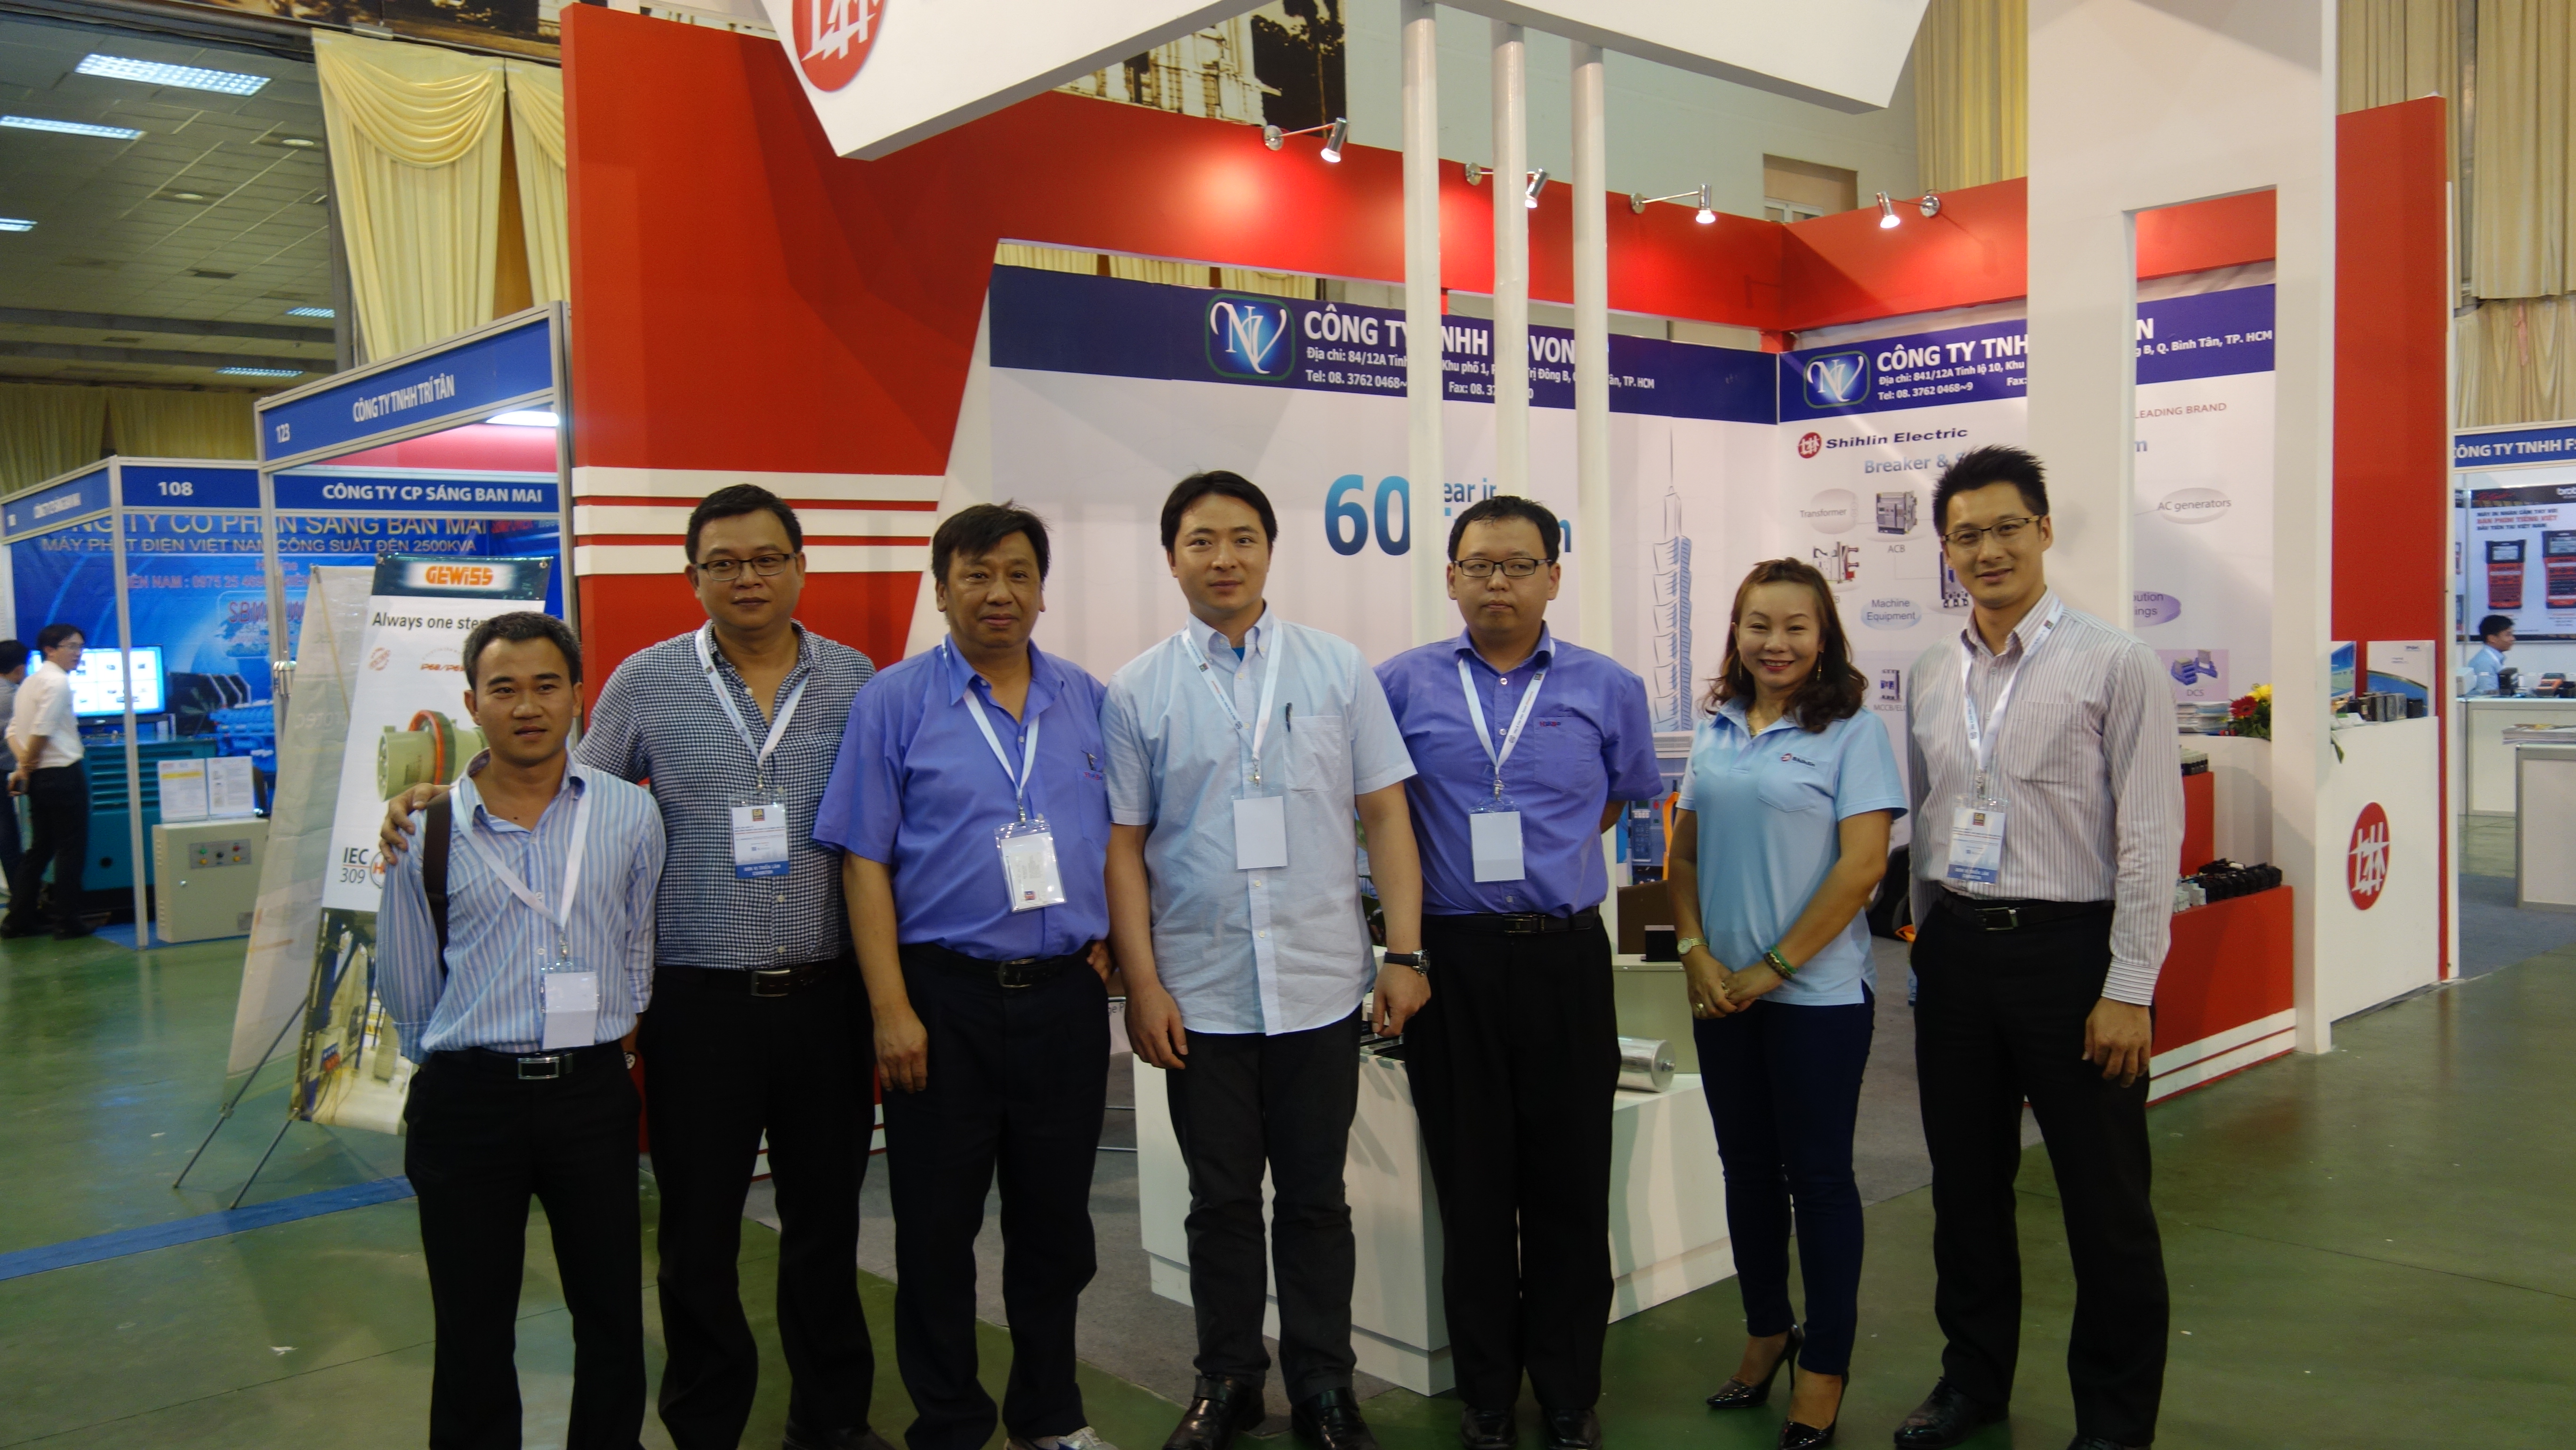 Shihlin Electric staffs at Electric & Automation Vietnam 2015